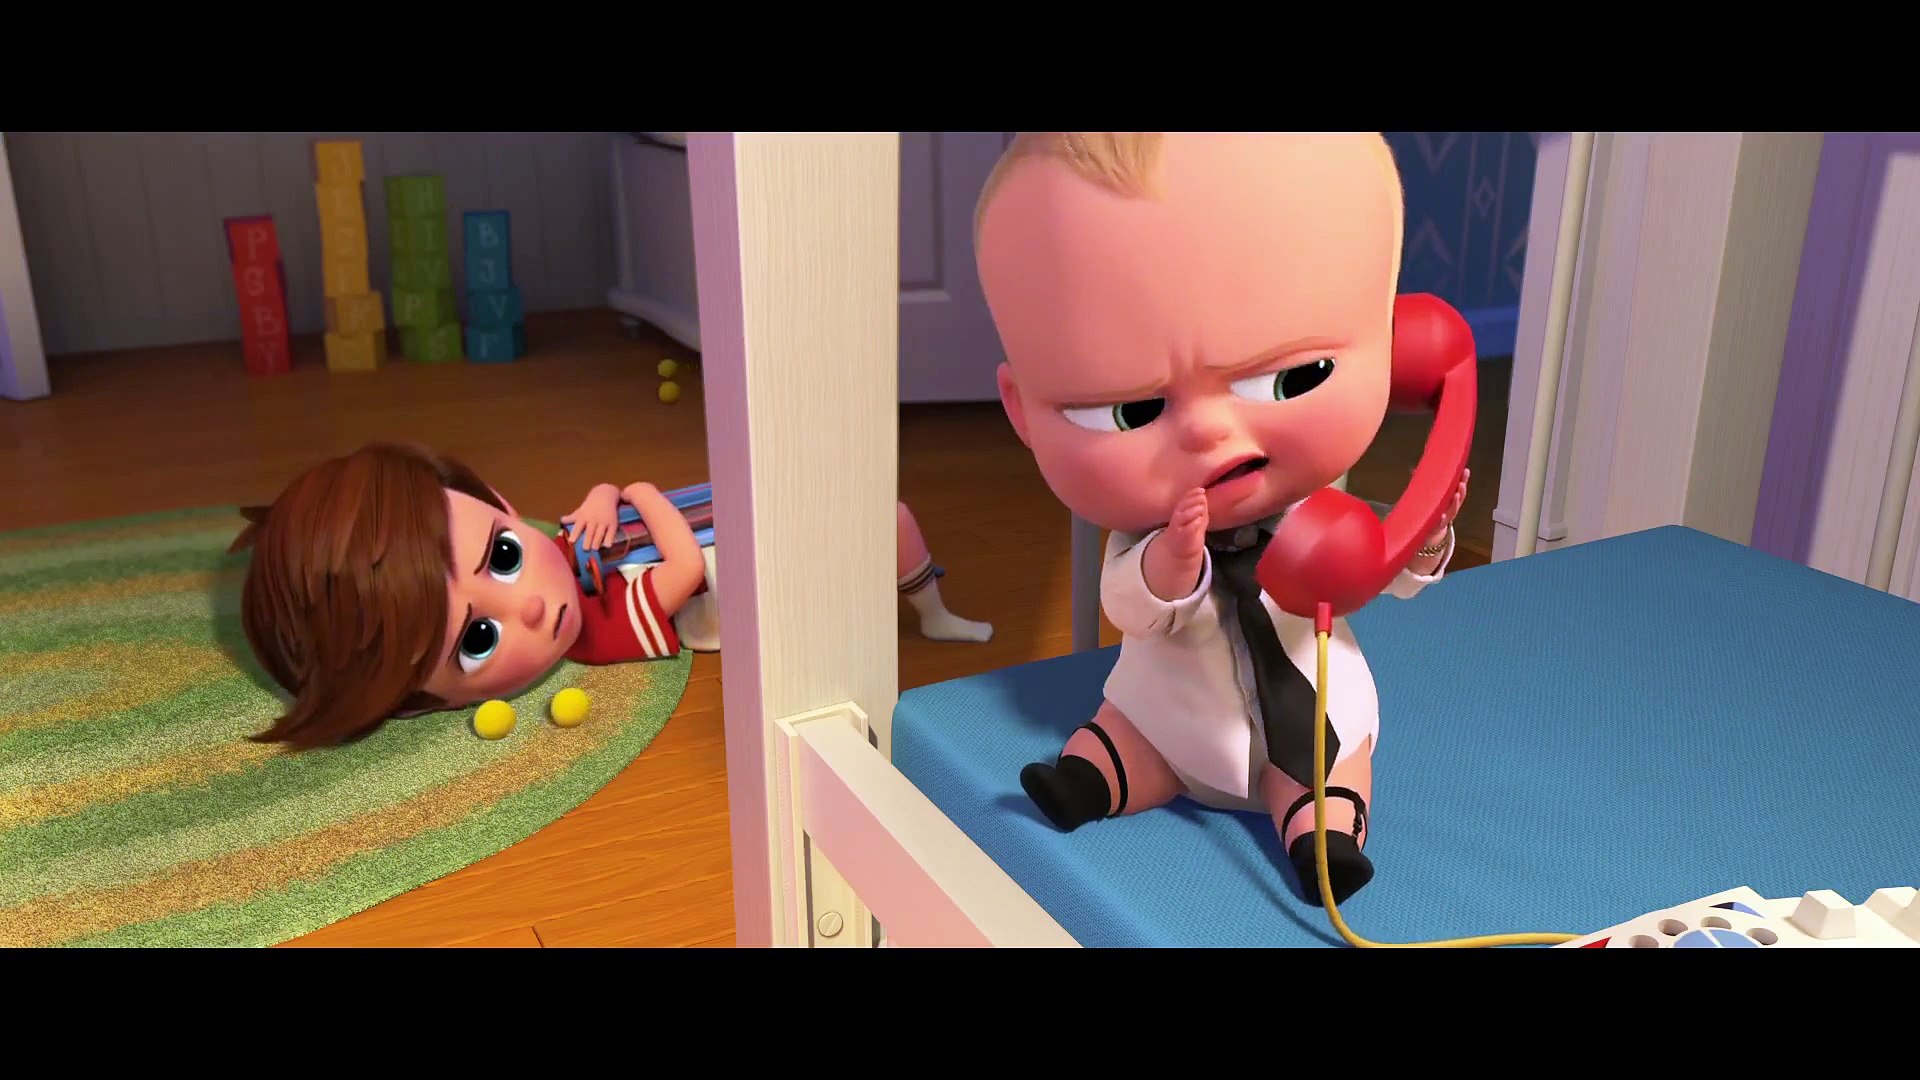 THE BOSS BABY - Official Trailer #2 (2017) Animated Comedy Movie HD - video  Dailymotion